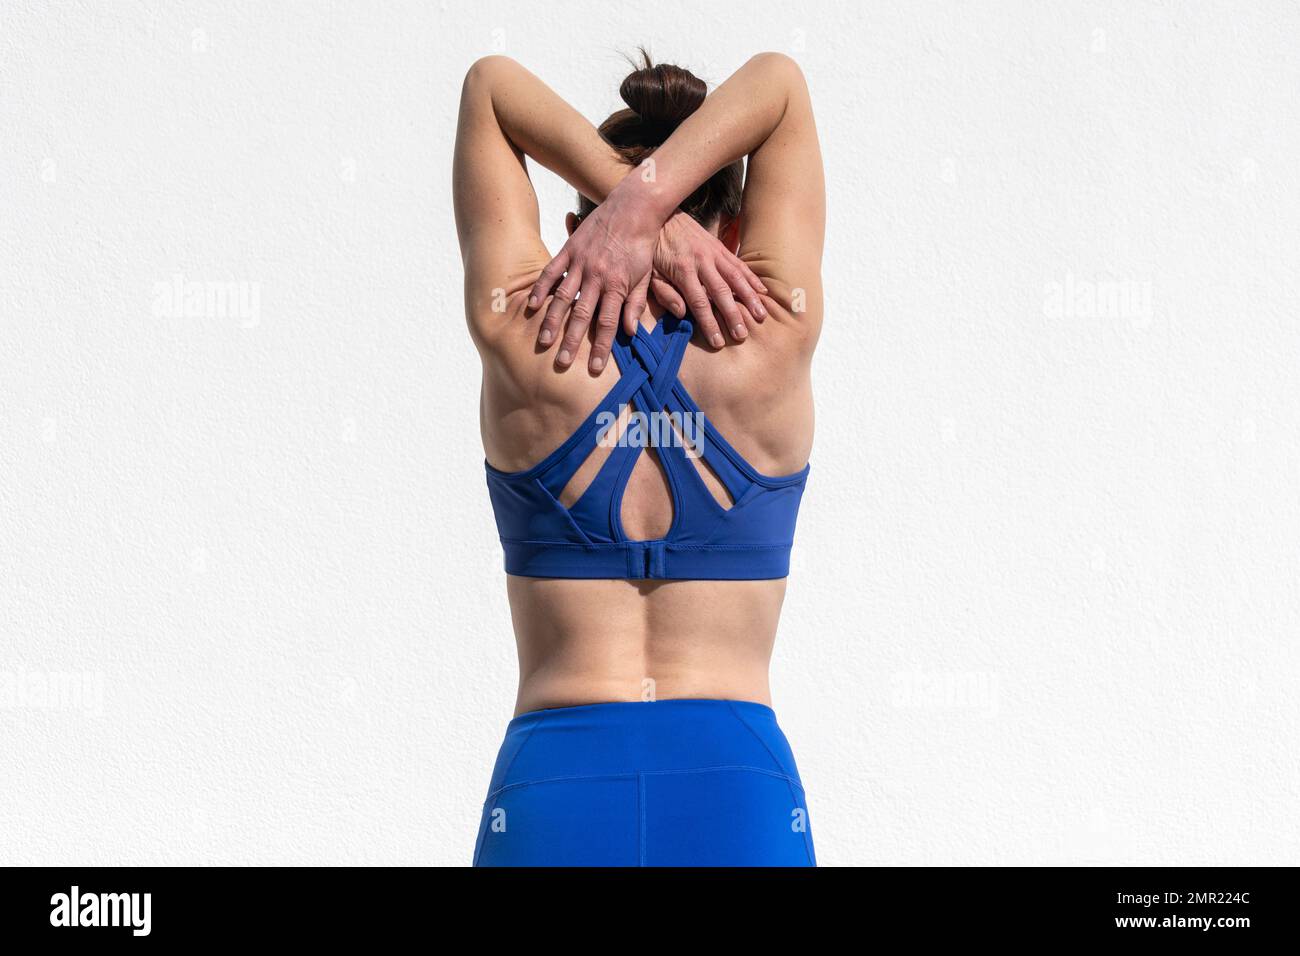 Rear view of a sporty woman doing an arm and shoulder stretch, warm up exercise concept. Stock Photo